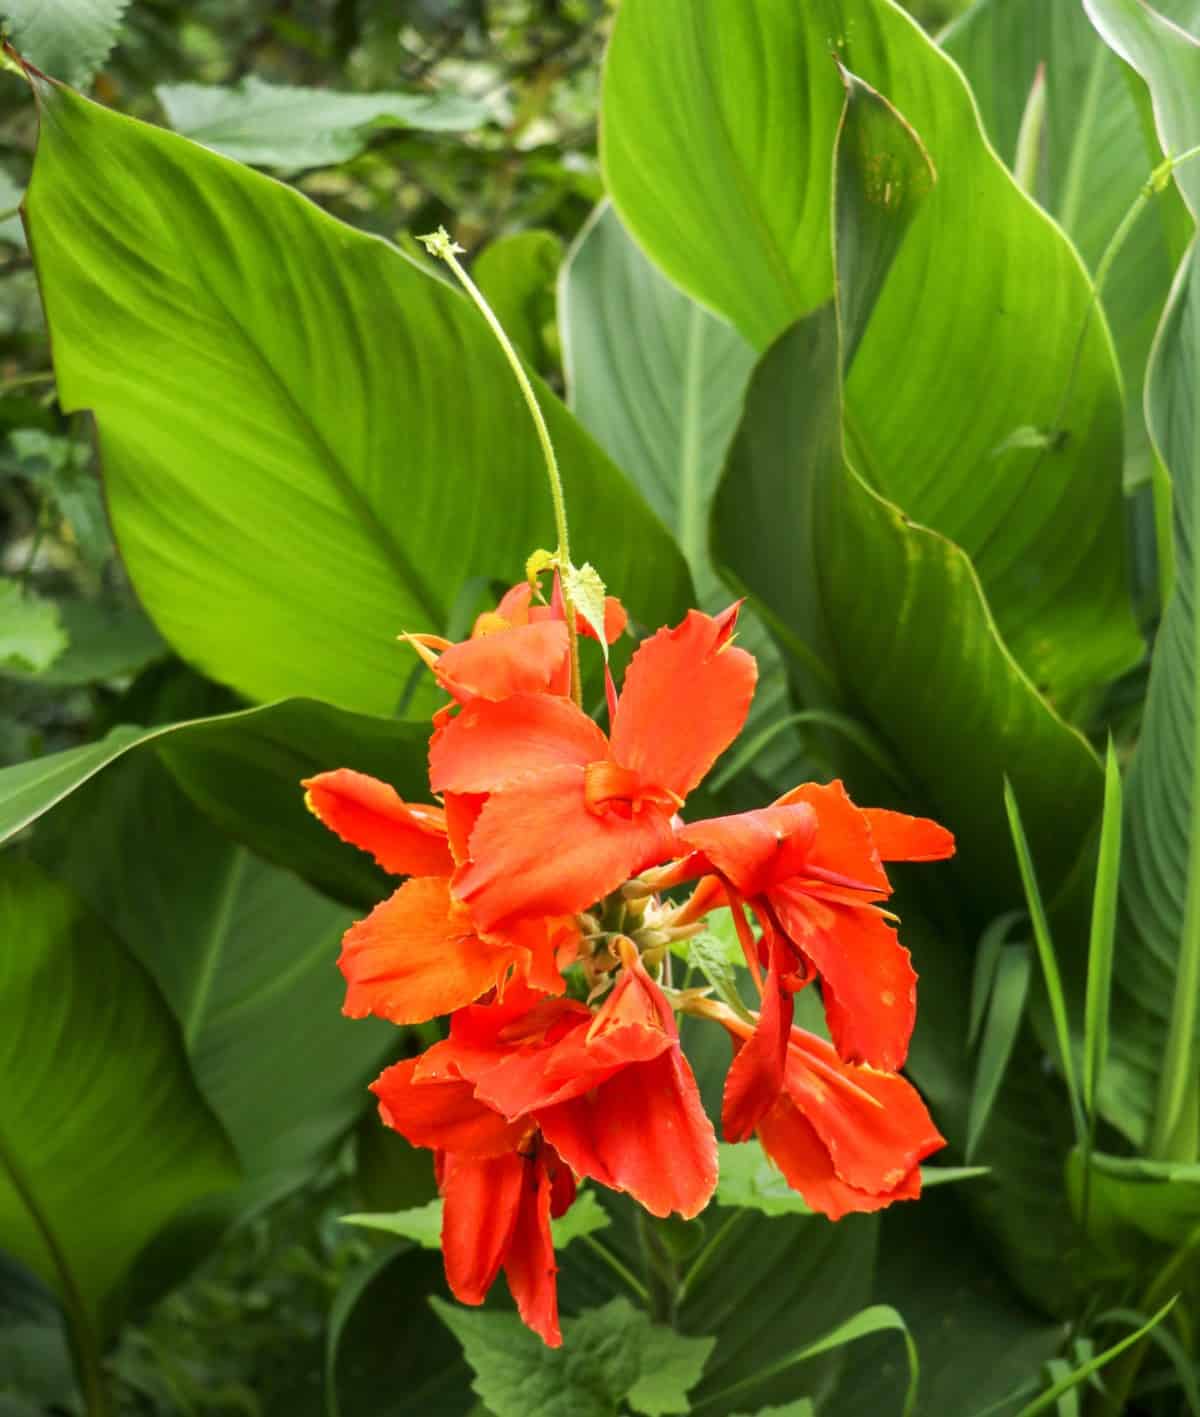 Canna lilies are tall plants with large, bright flowers.